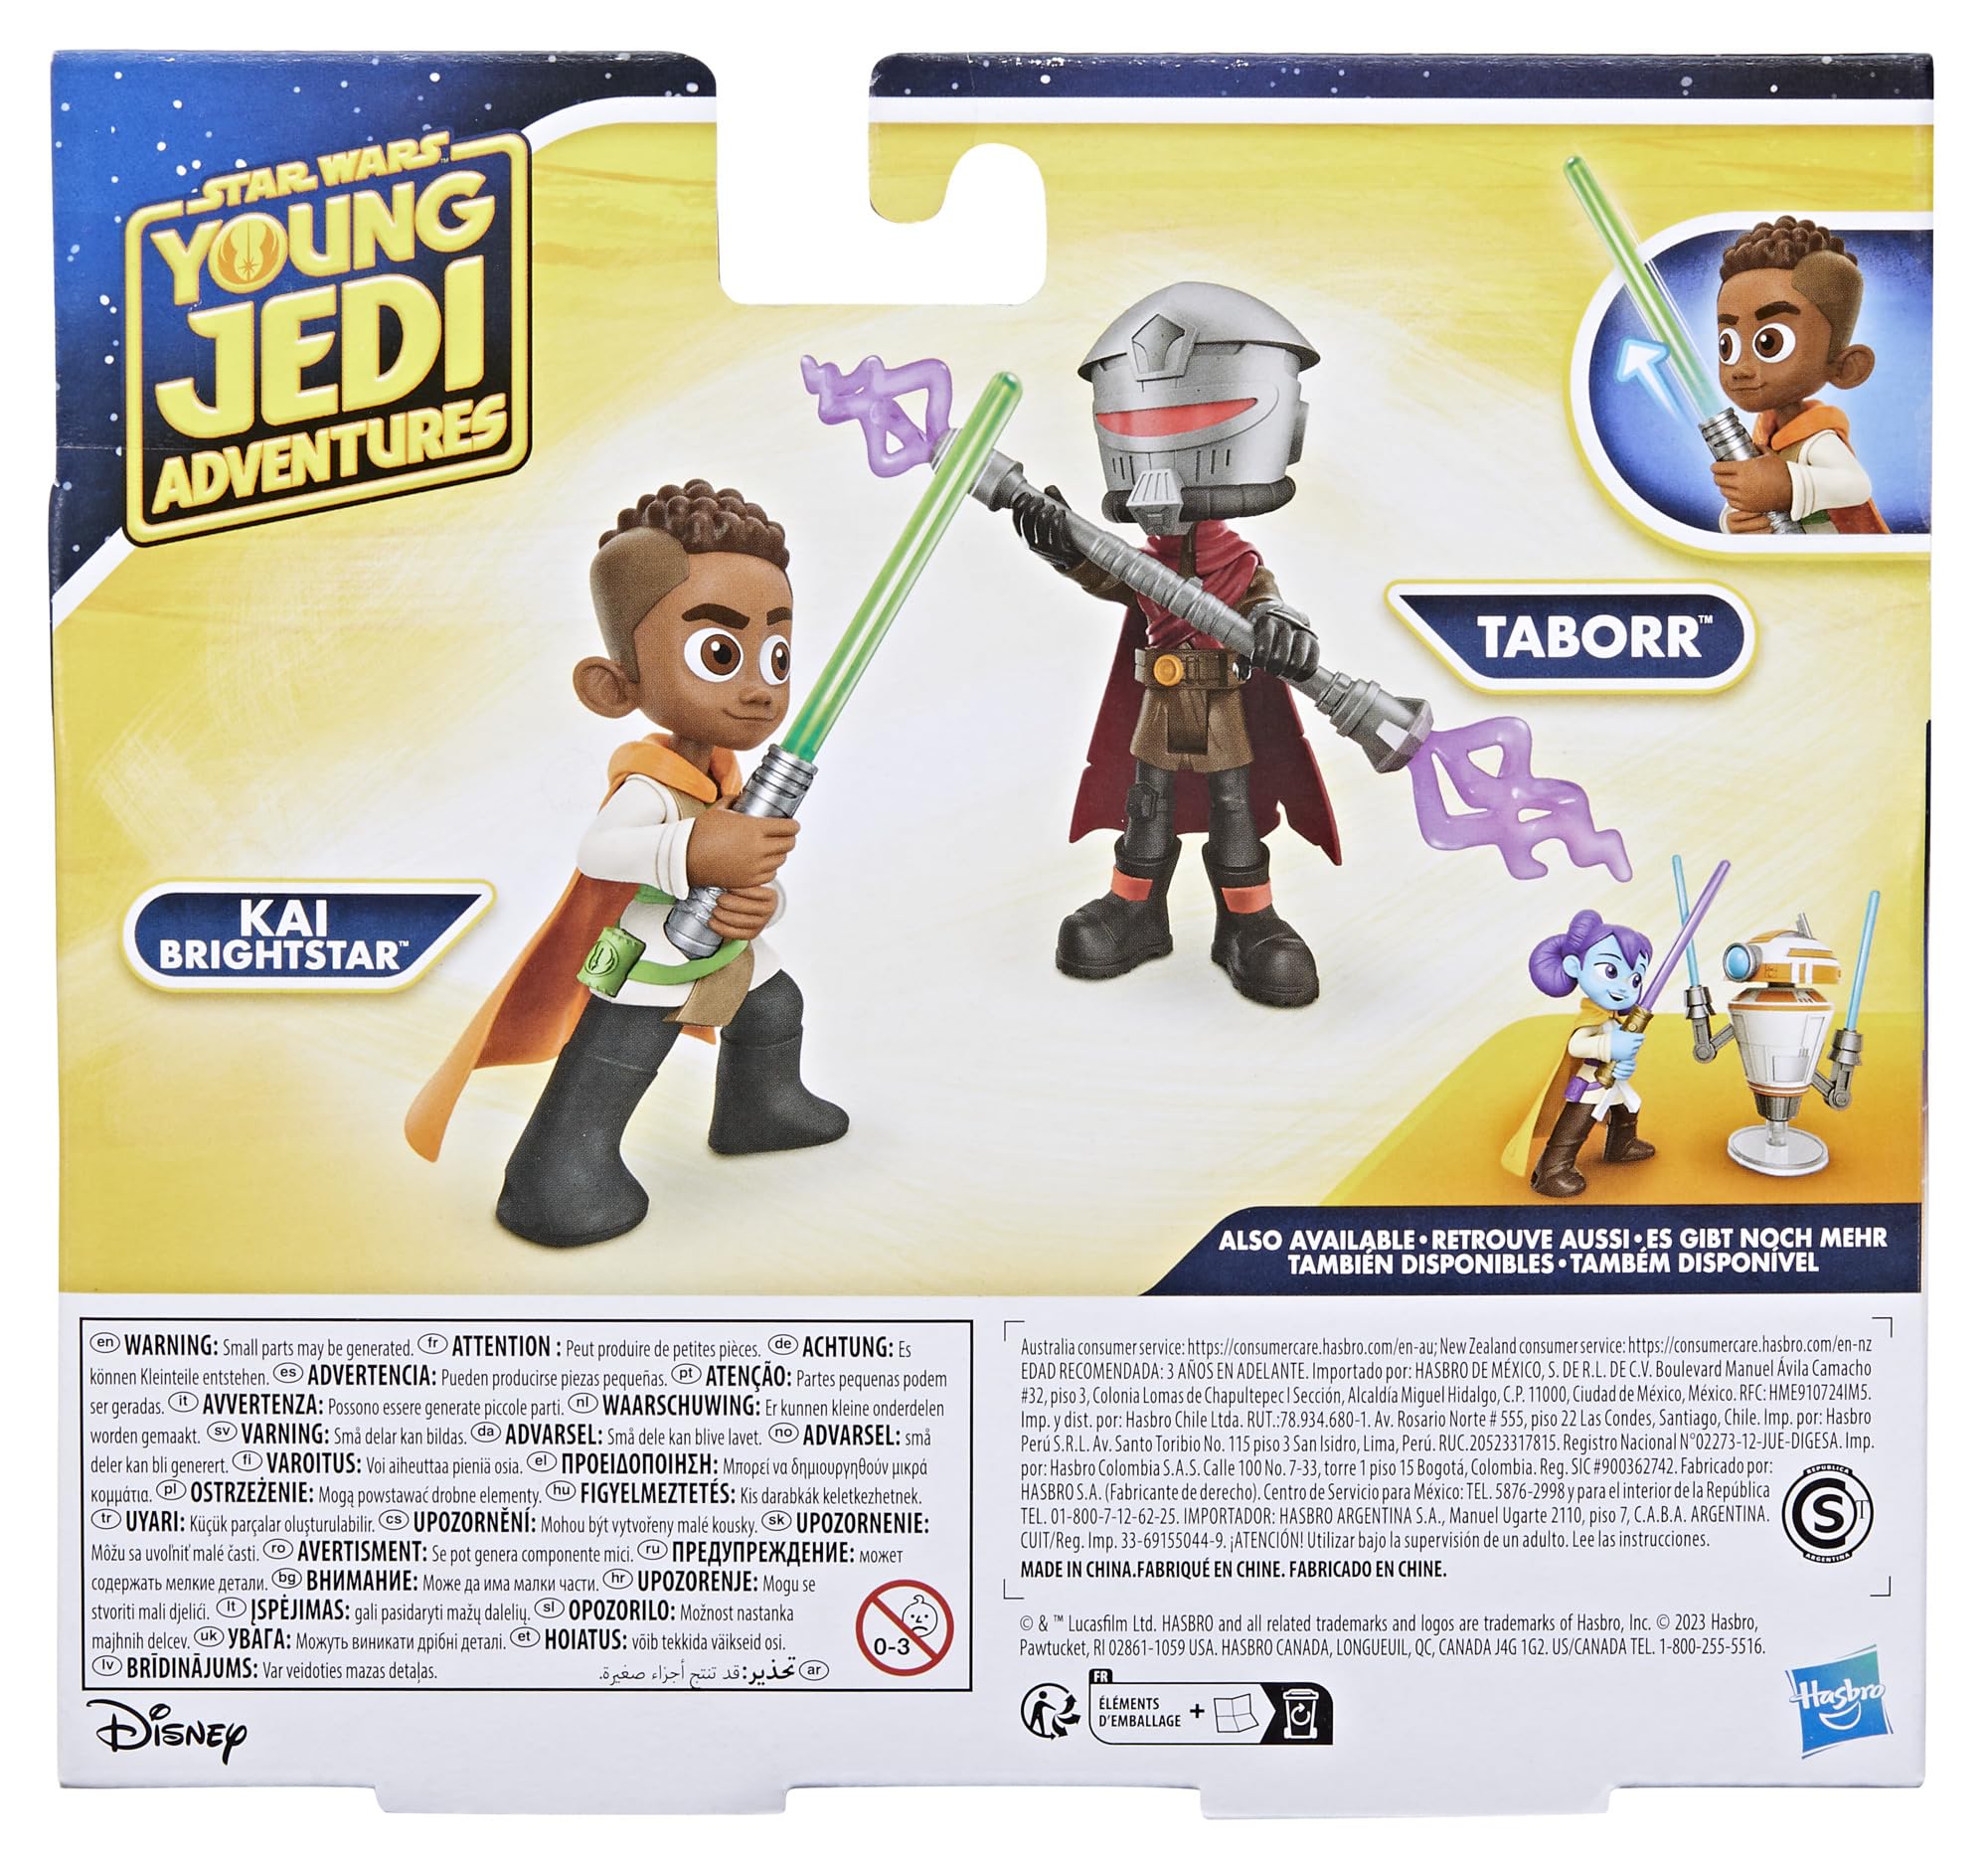 STAR WARS Young Jedi Adventures Pop-Up Lightsaber Duel, Kai Brightstar & Taborr Action Figures, 4-Inch Scale Toys, Preschool Toys for 3 Year Old Boys & Girls